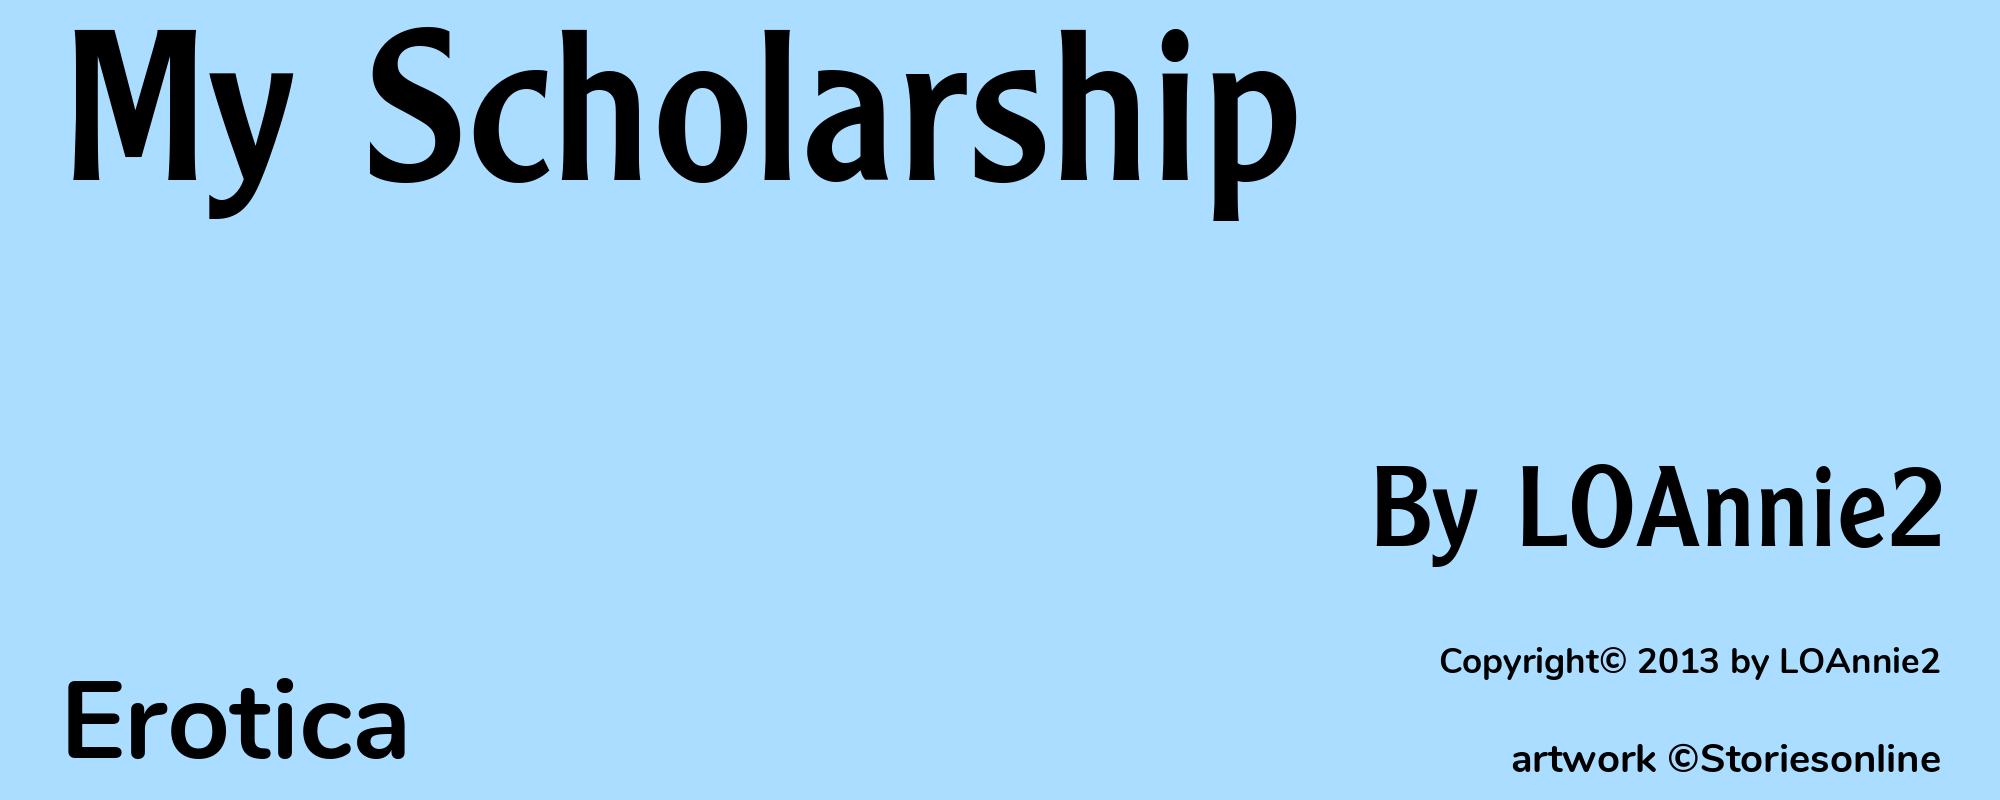 My Scholarship - Cover